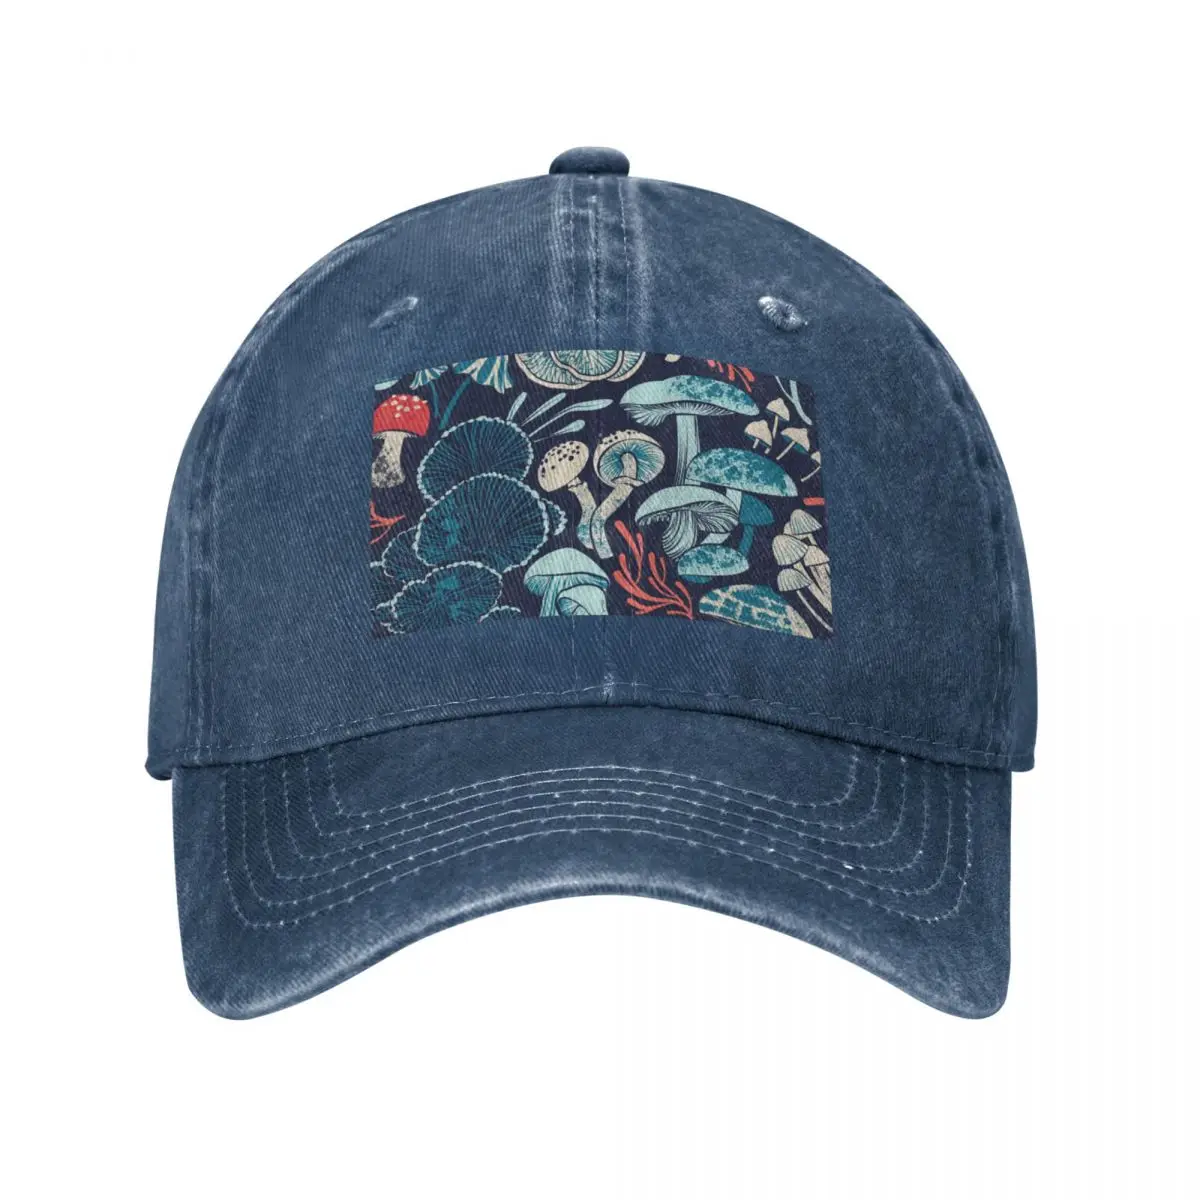 

Mystical fungi // midnight blue background aqua teal coral and red wild mushrooms Cap Cowboy Hat anime cap for men Women's